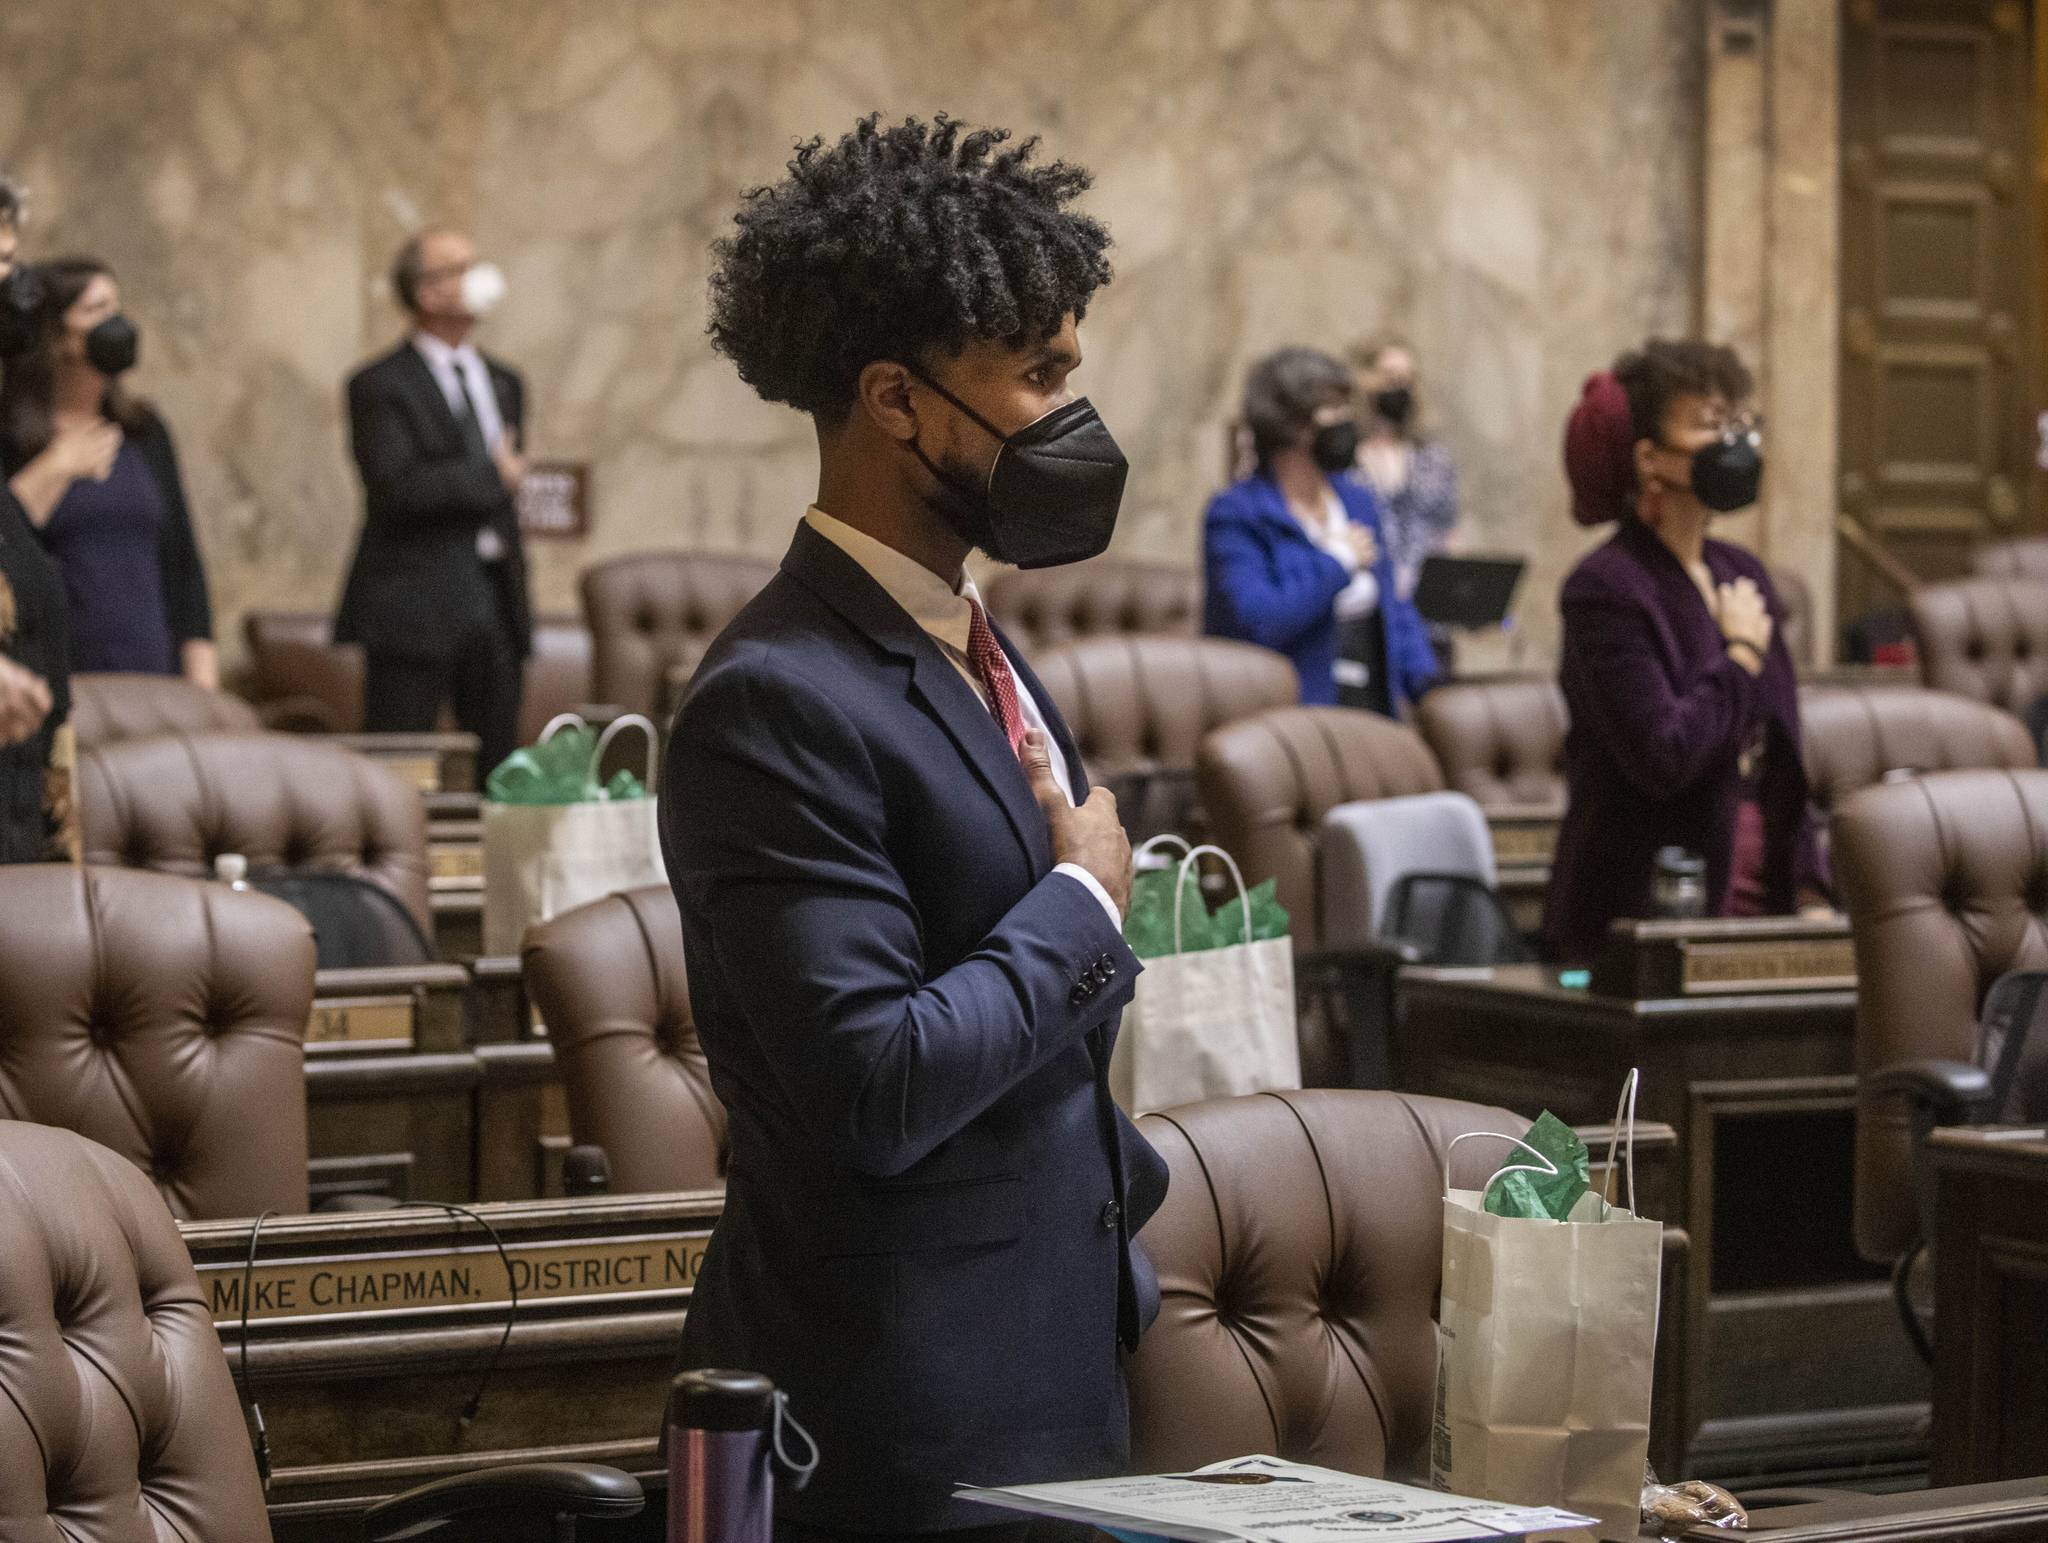 In this file photo from Jan. 11, 2021, state Rep. Jesse Johnson, D-Federal Way, stands with other members at the beginning of the House session during which legislators were spaced at a social distance in Olympia. Johnson hopes to see the Legislature end qualified immunity for police officers, which would allow them to be sued in state court, and to see it authorize community oversight boards that could have input on local policies and receive complaints about officers. (Steve Ringman/The Seattle Times via The Associated Press)